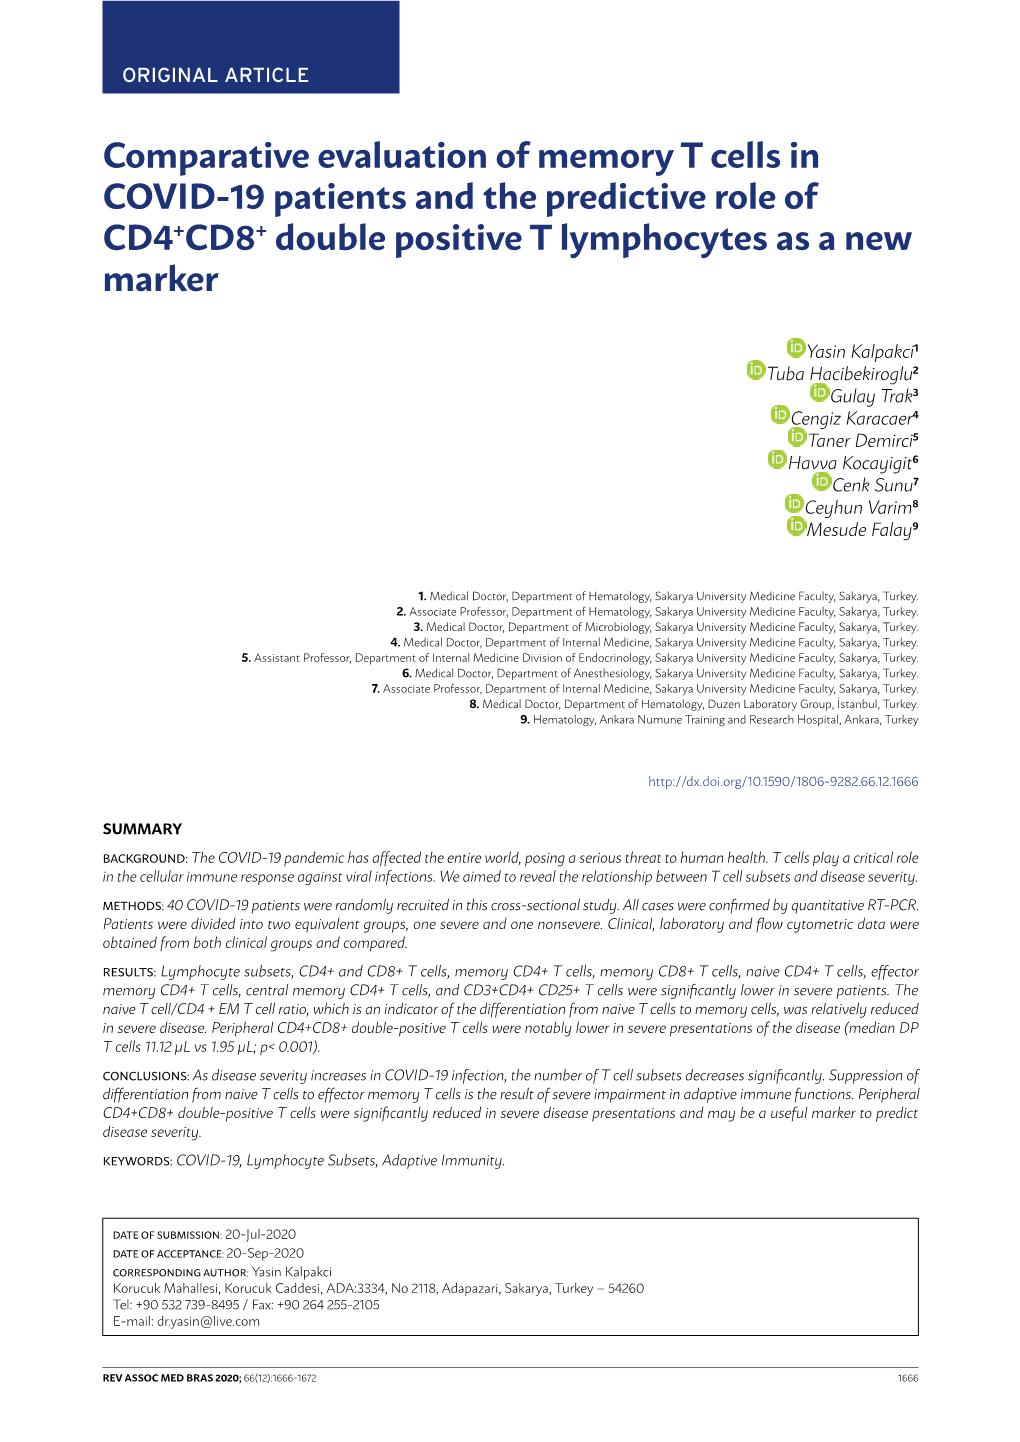 Comparative Evaluation of Memory T Cells in COVID-19 Patients and the Predictive Role of CD4+CD8+ Double Positive T Lymphocytes As a New Marker